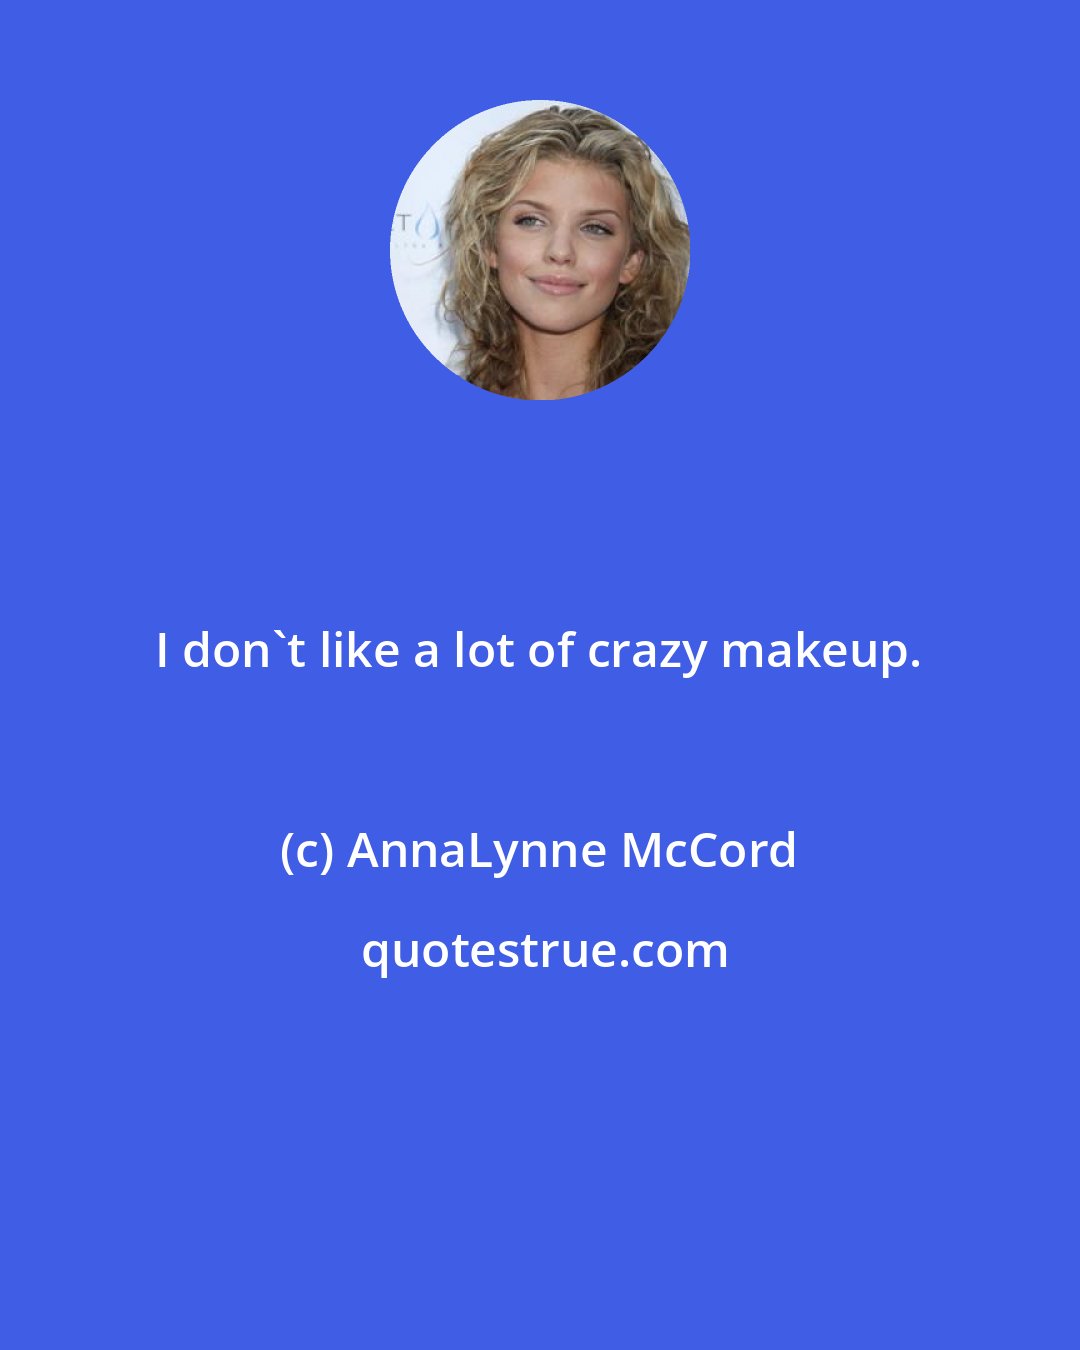 AnnaLynne McCord: I don't like a lot of crazy makeup.